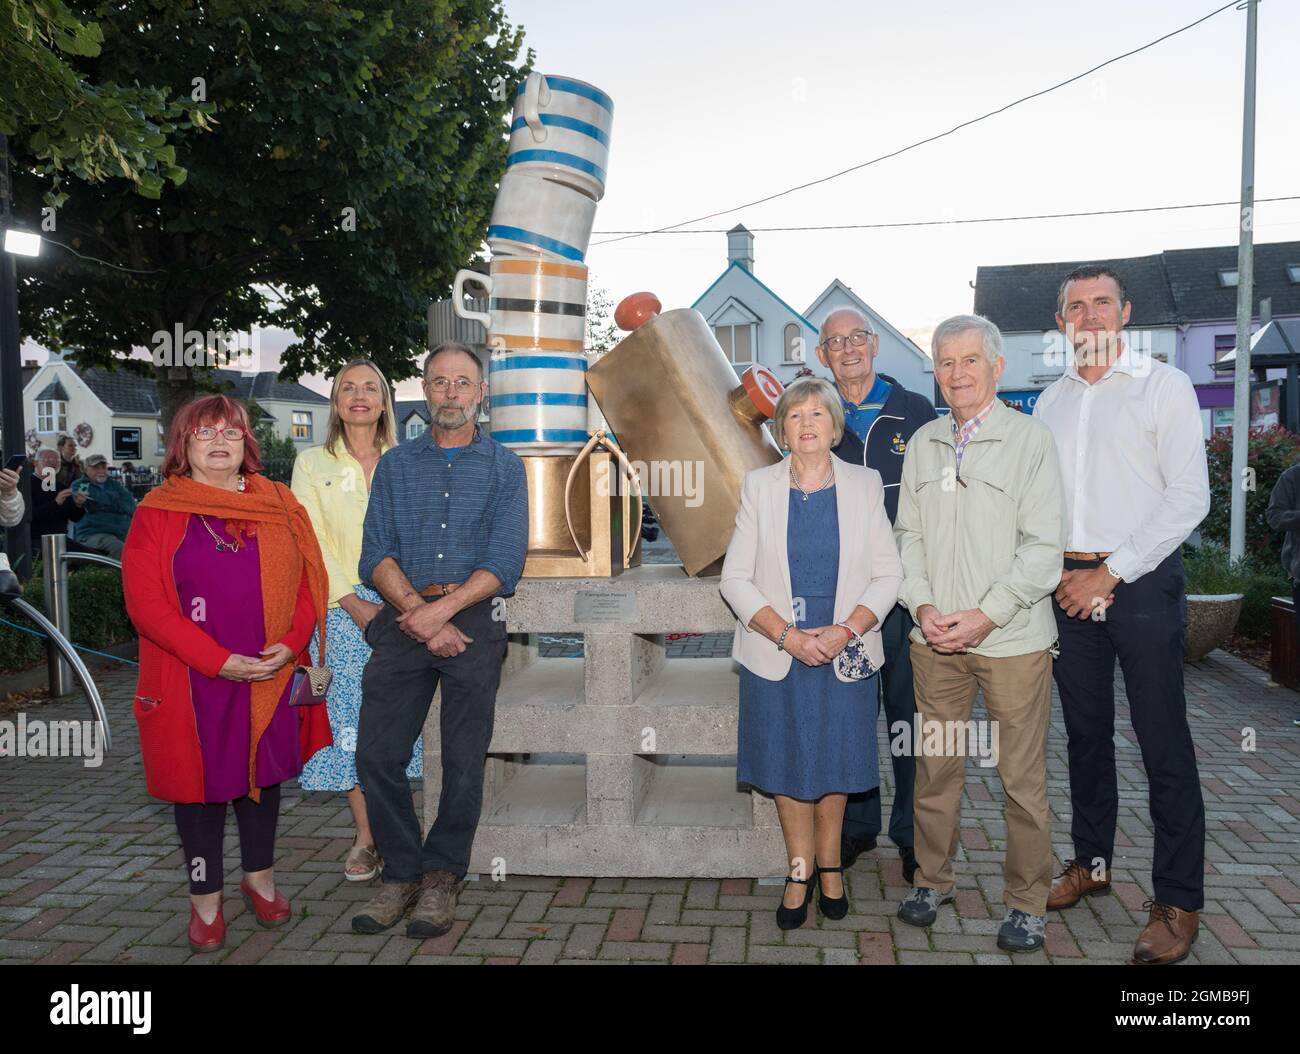 Carrigaline, Cork, Ireland. 17th September, 2021.Members of the Tidy Towns who unveiled at staute on Culture Night in honour of the now closed Carrigaline Pottery at the town centre in Carrigaline, Co. Cork. Picture shows LtoR; Maura Allen, Clare O' Mullane, Mick Wilkins (Sculptor), Betty O' Riordan, Thos Maye, Pat Farrell and Liam O'Connor.  - Picture; David Creedon / / Alamy Live News Stock Photo